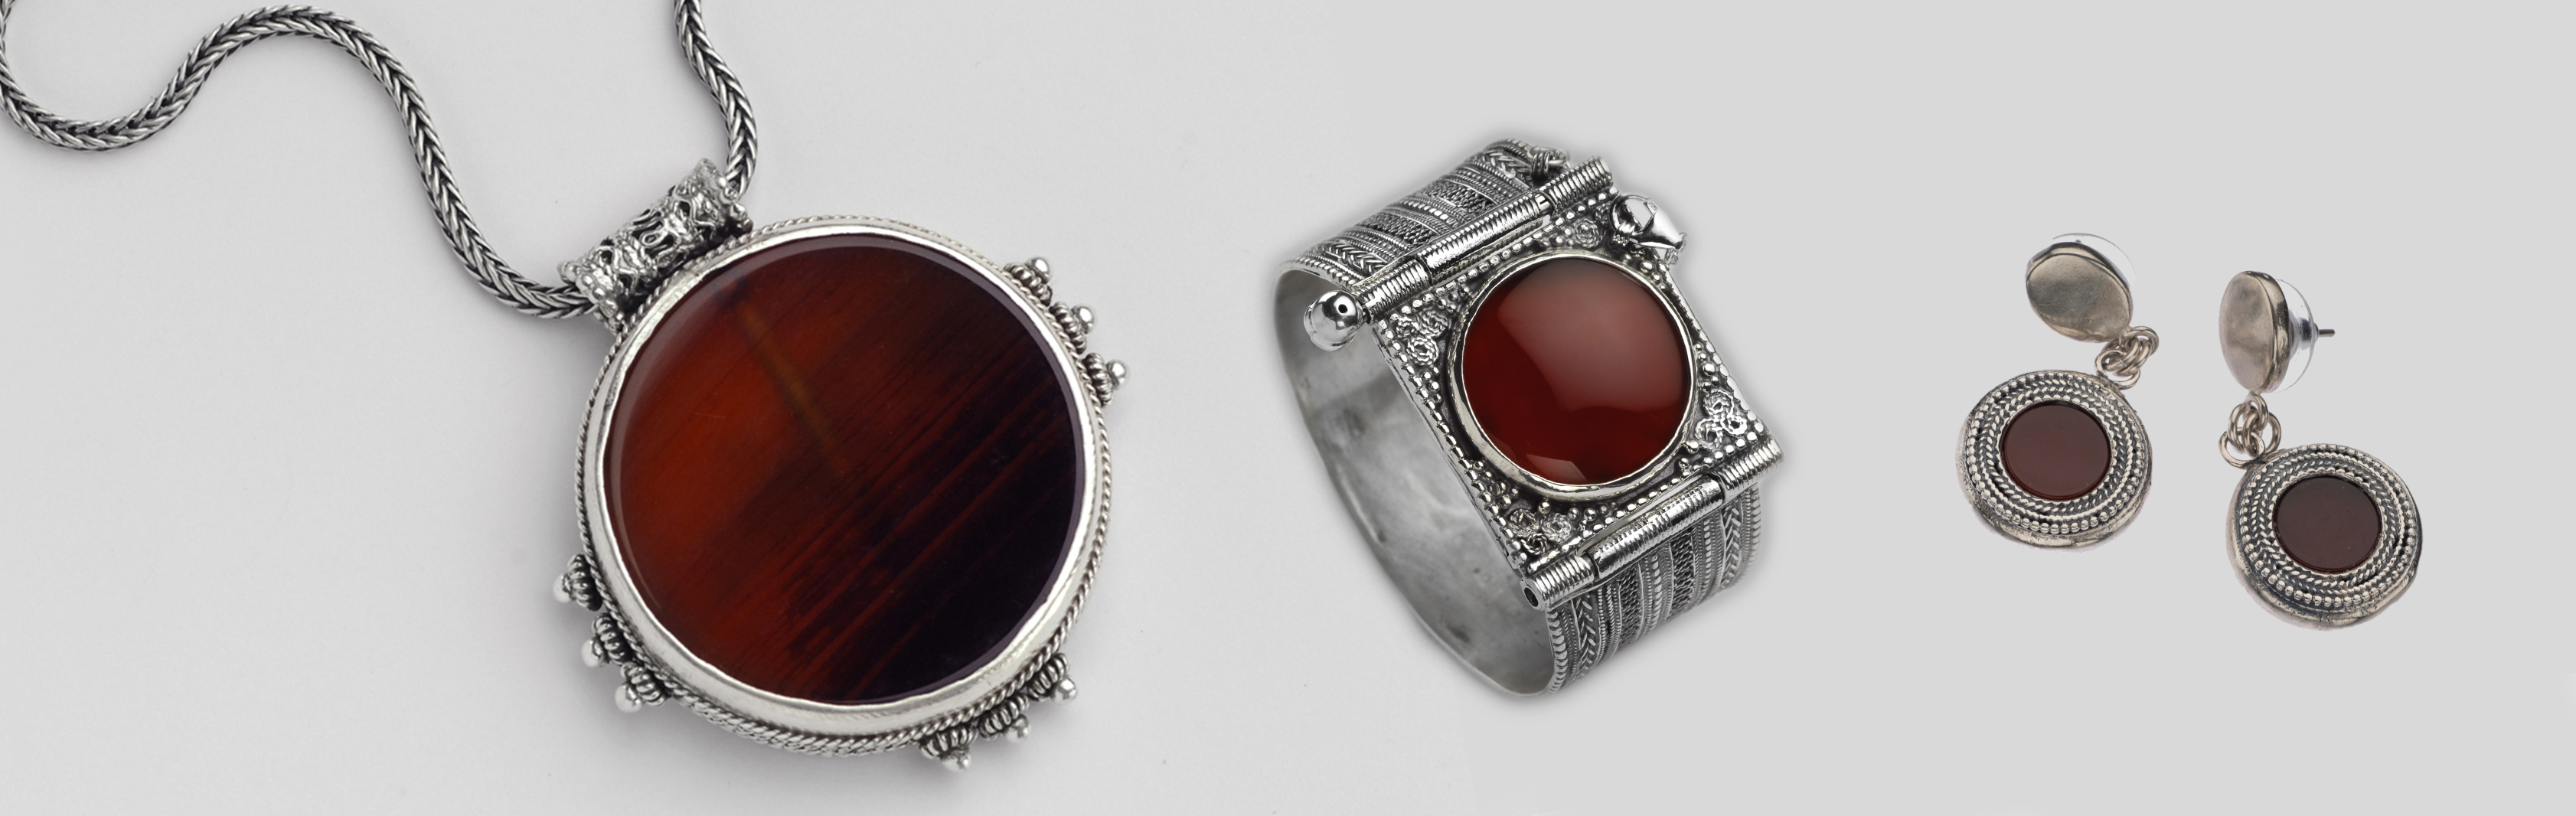 Red Moon Collection | 925 Sterling Silver Jewelry with Carnelian